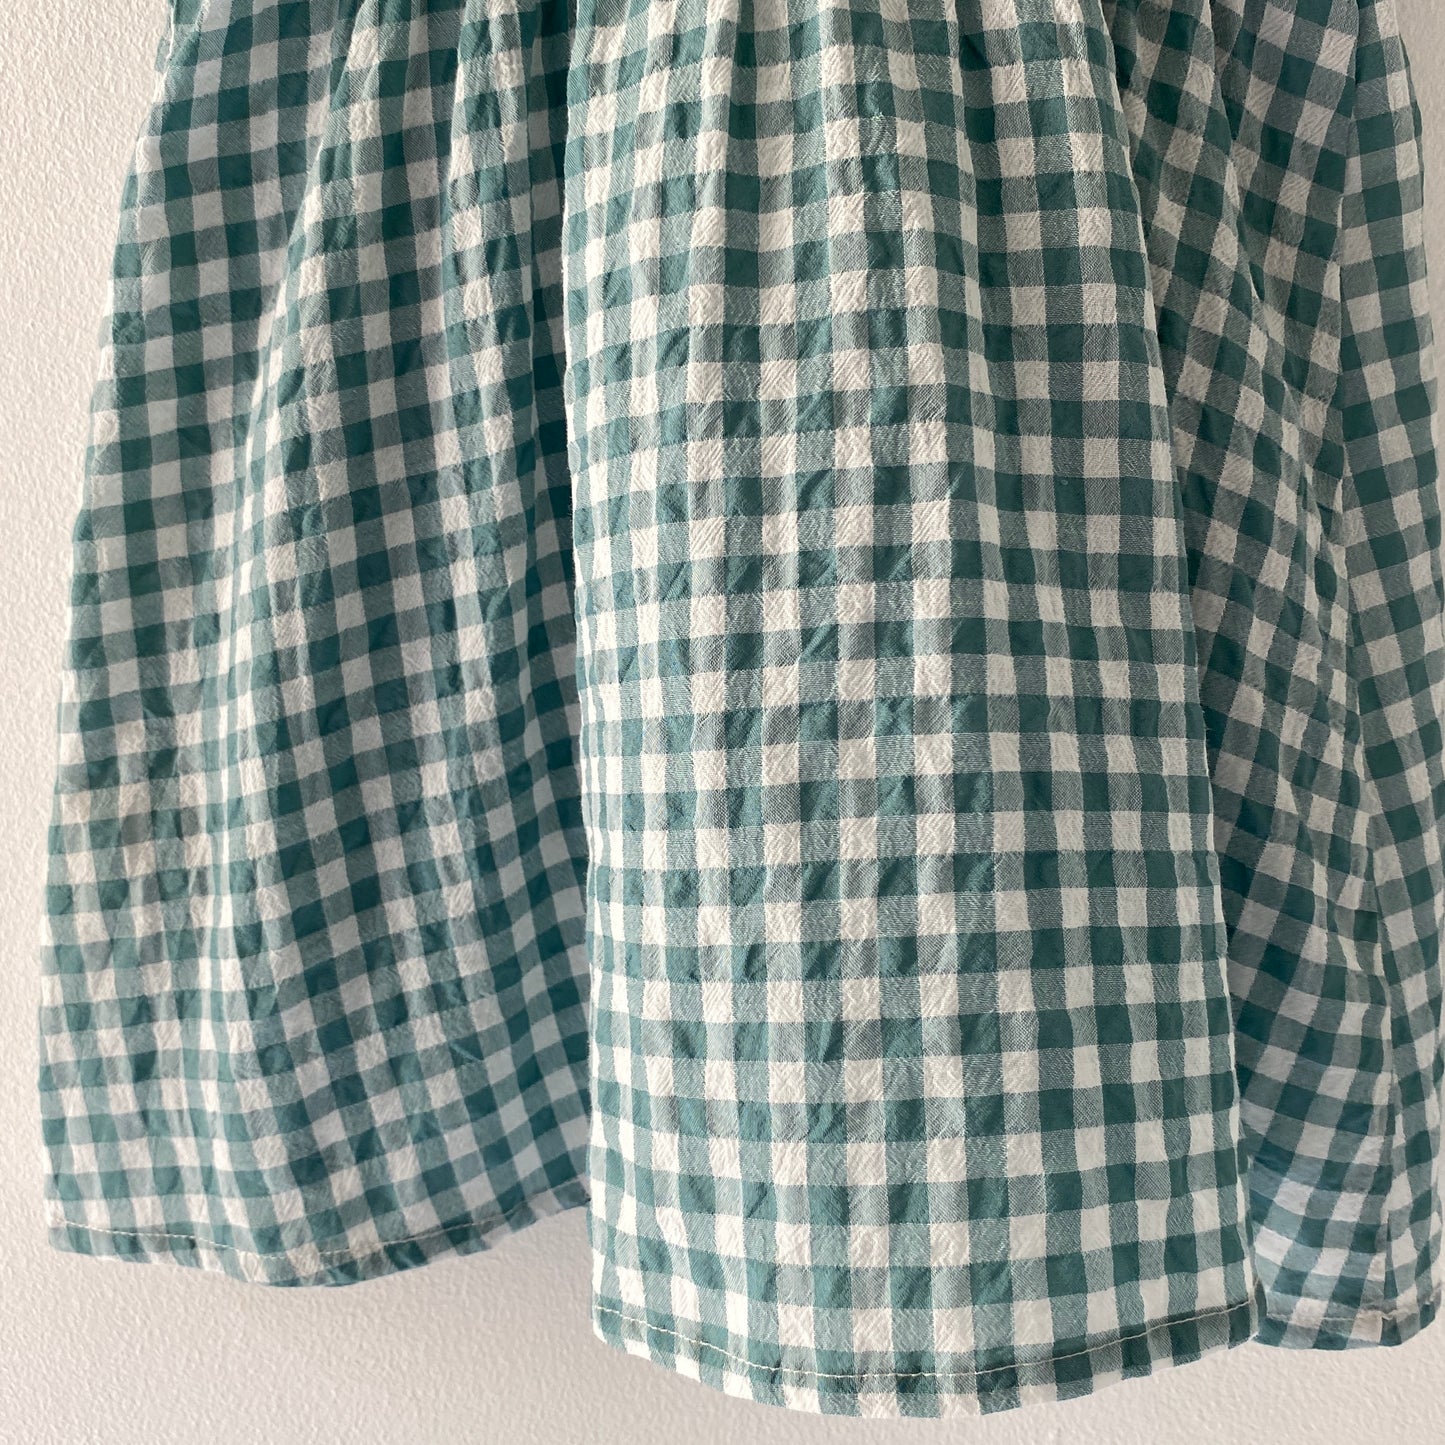 Gingham Teal Button-Front Dress (2/3Y)